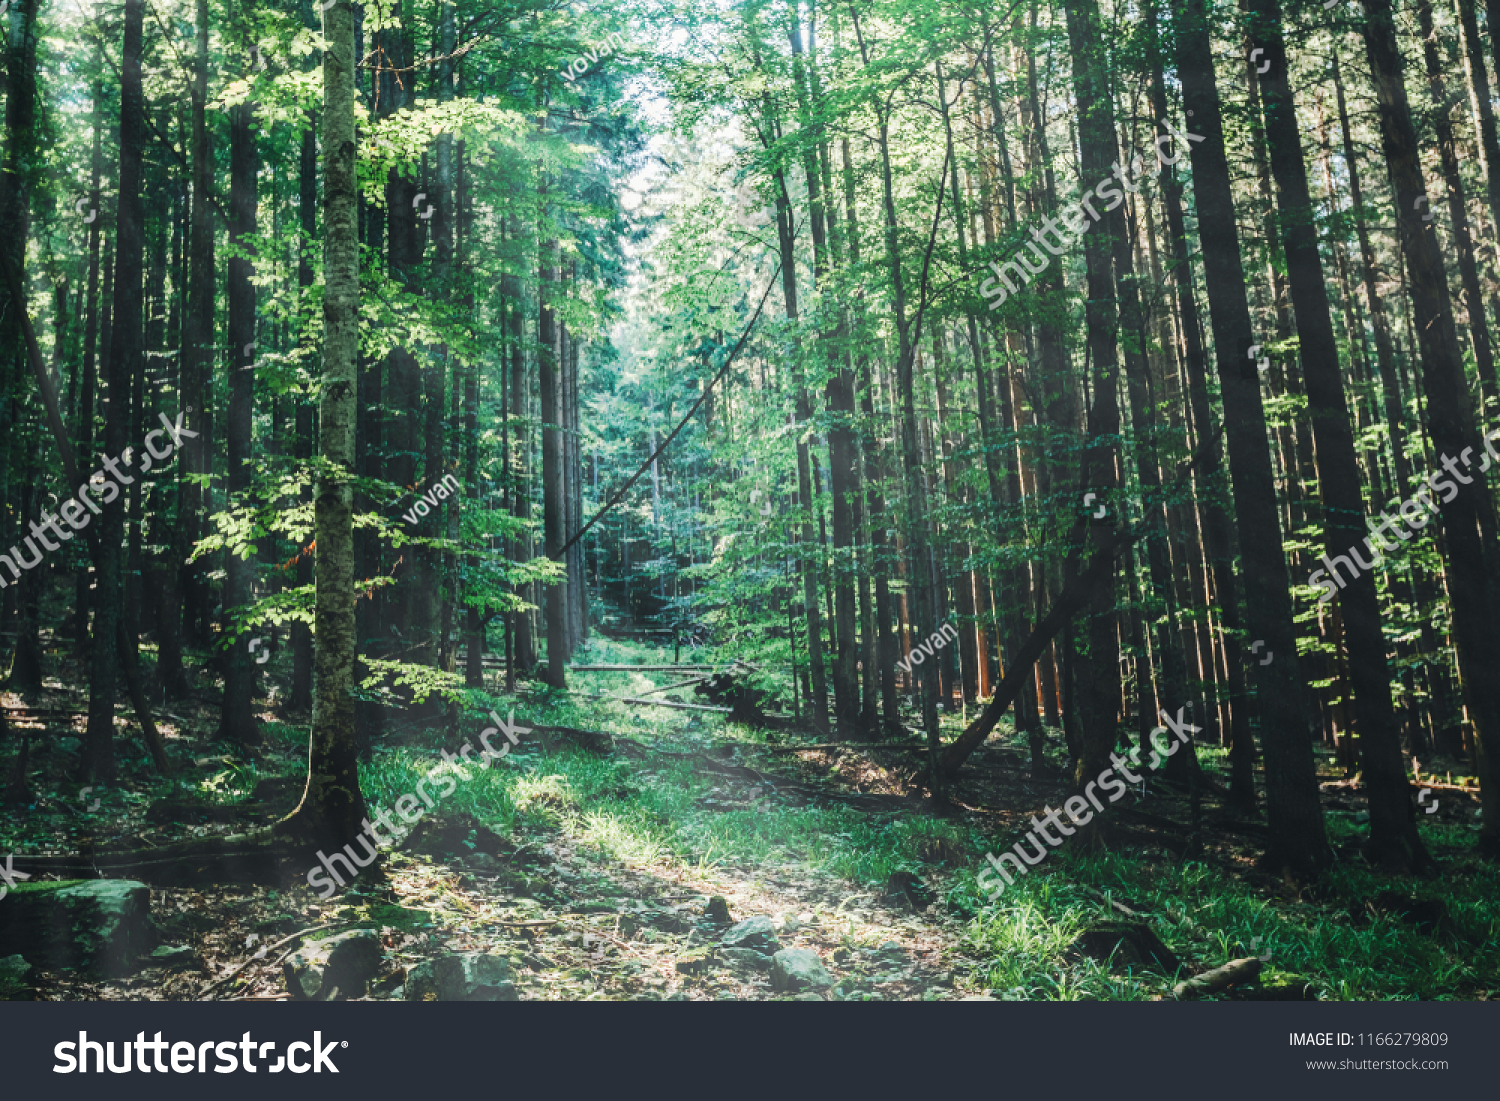 nature tree . pathway in the forest with sunlight backgrounds. #1166279809